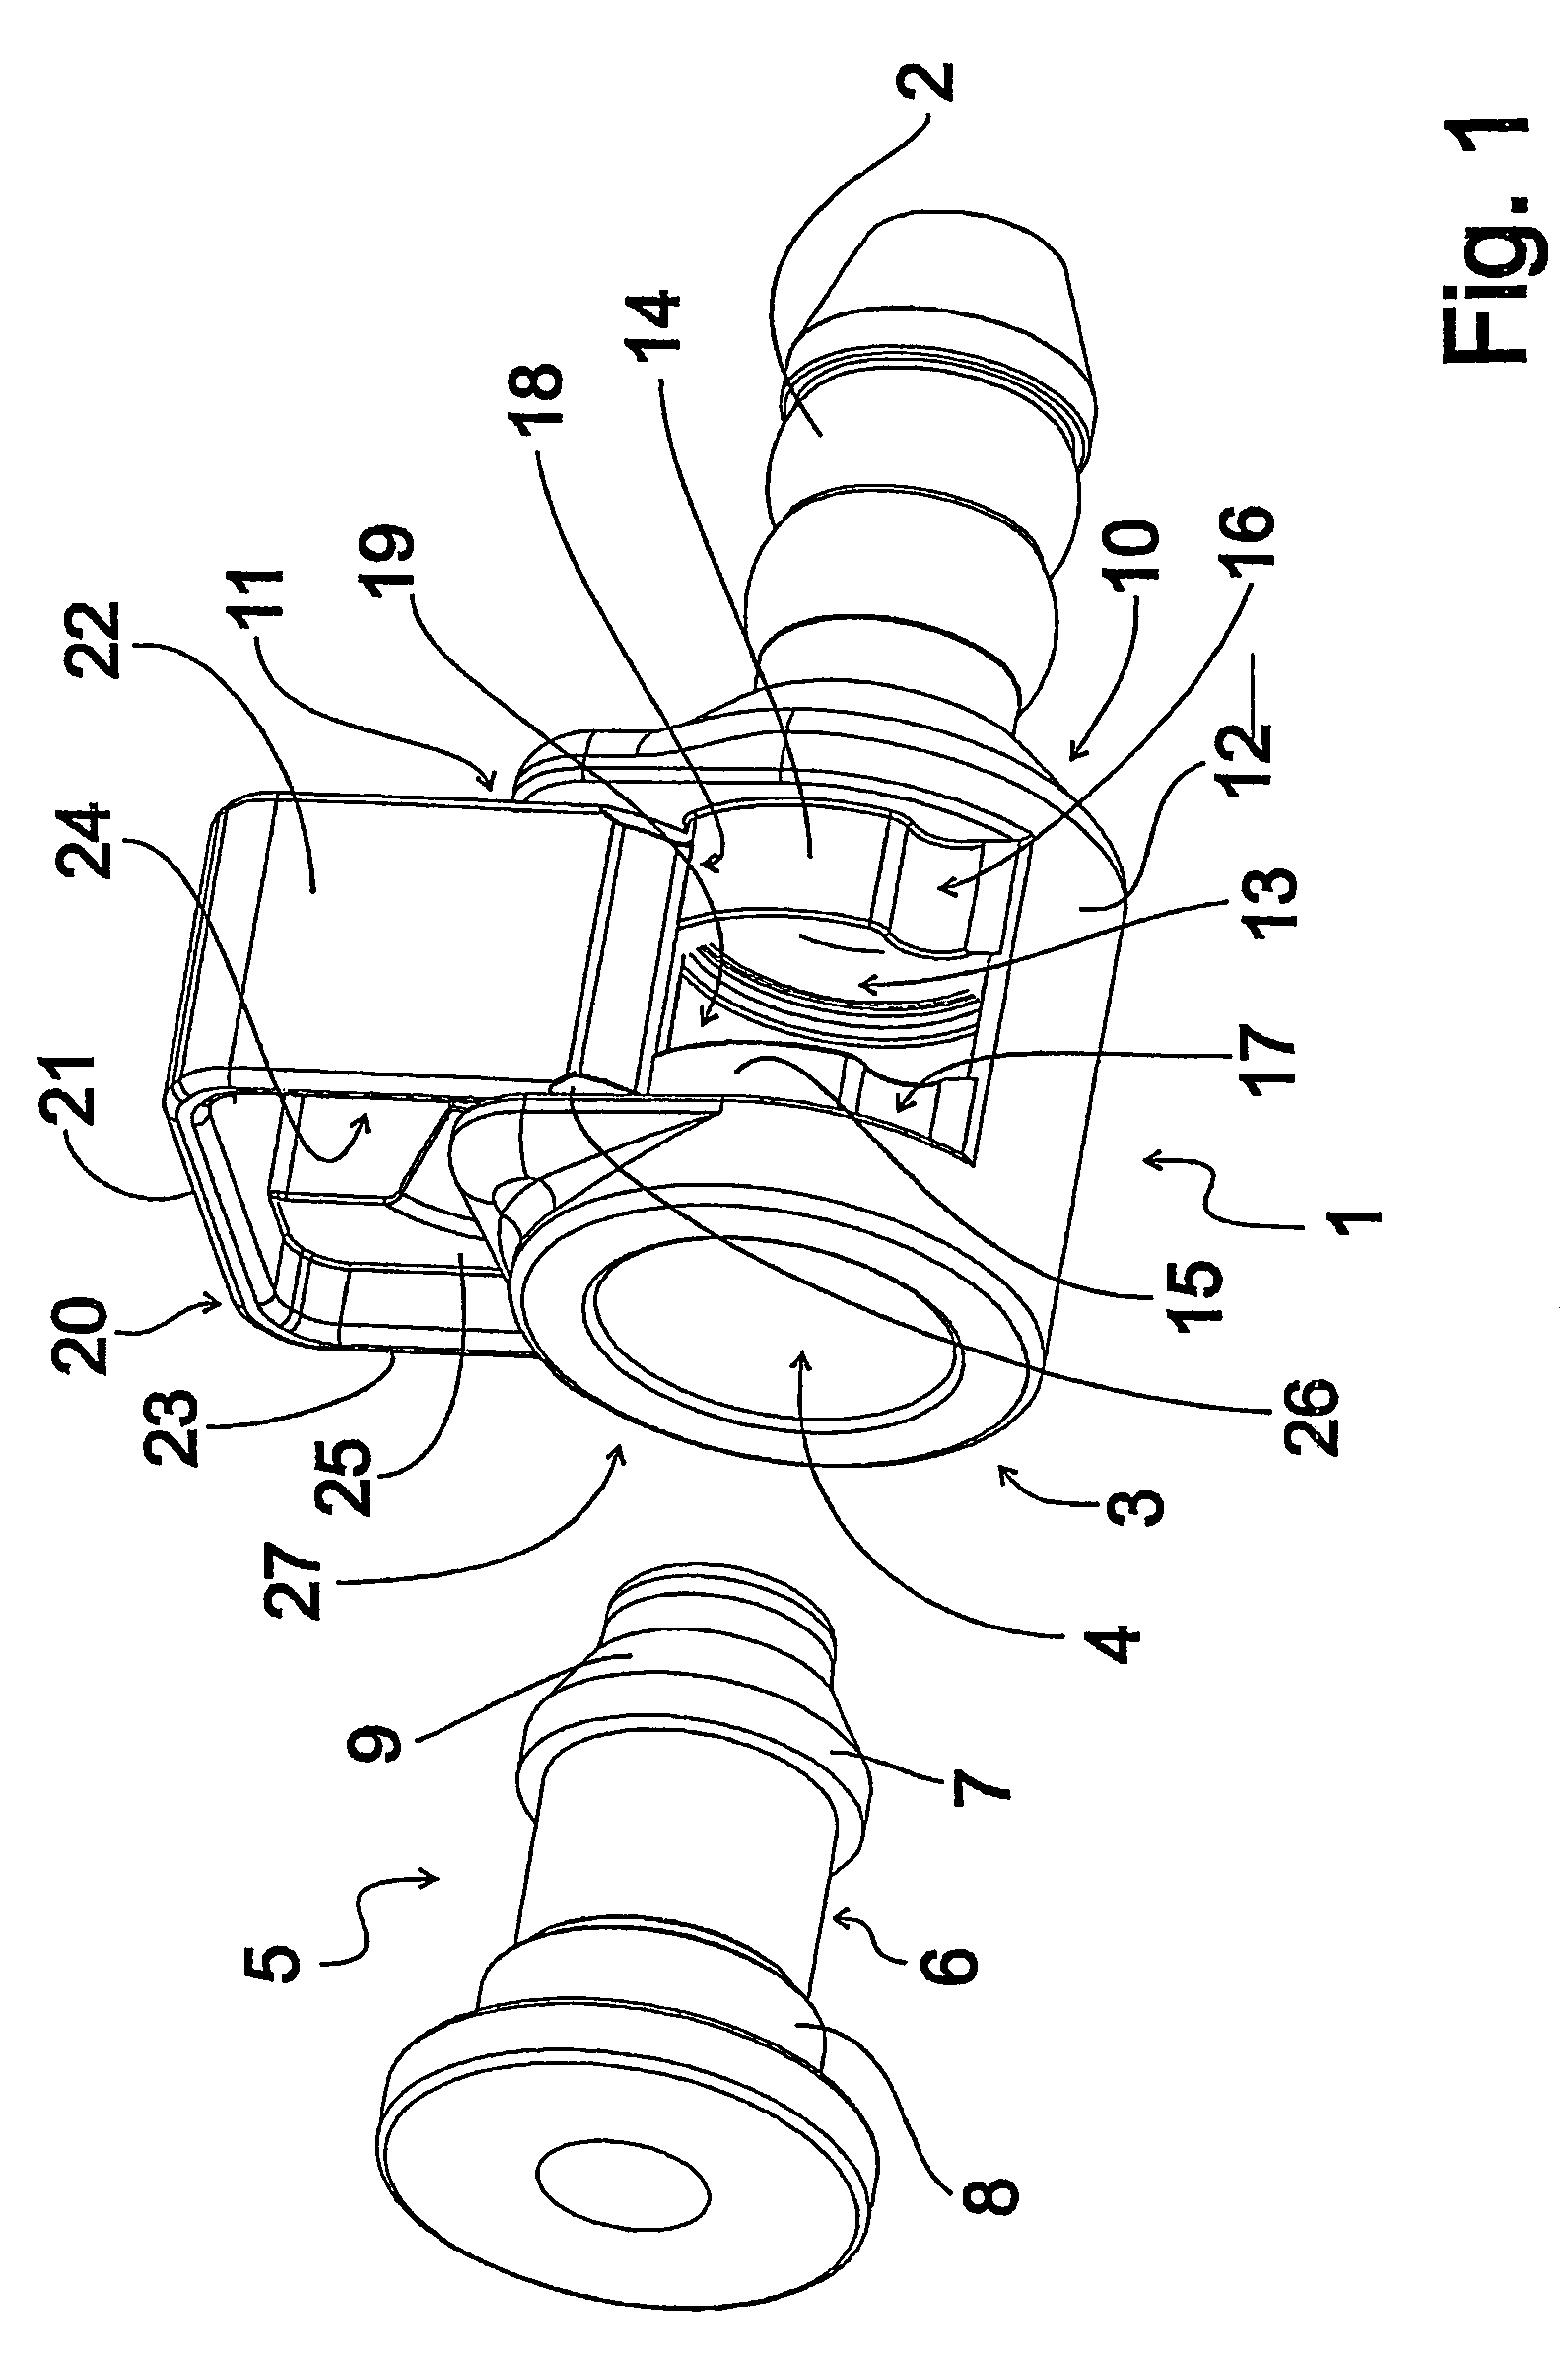 Coupling for a fluid conducting system